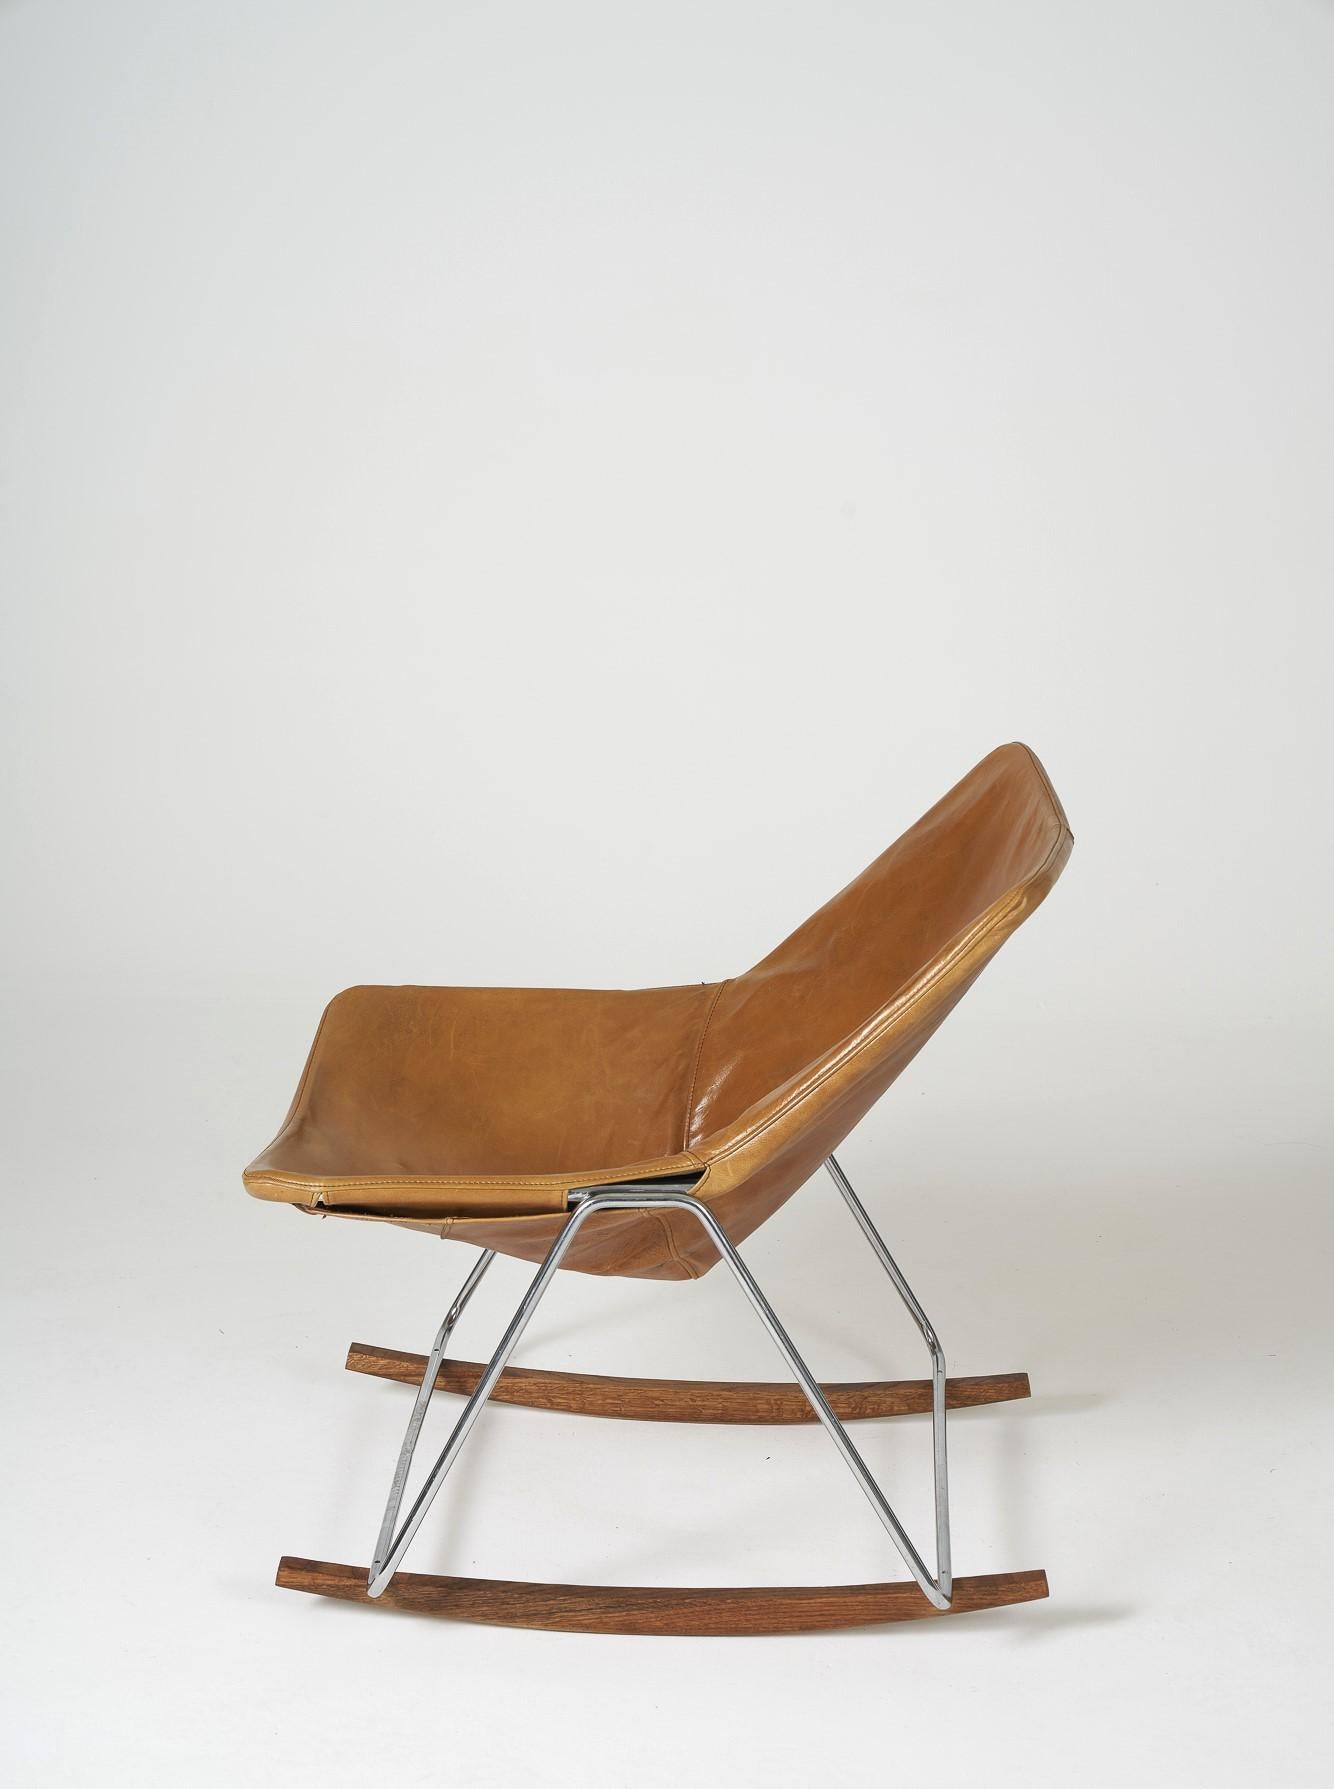 Rocking chair G1 designed by Pierre Guariche in the 50s. Seat in cognac leather, structure in chromed steel and legs in solid oak. Reissue in very good condition.